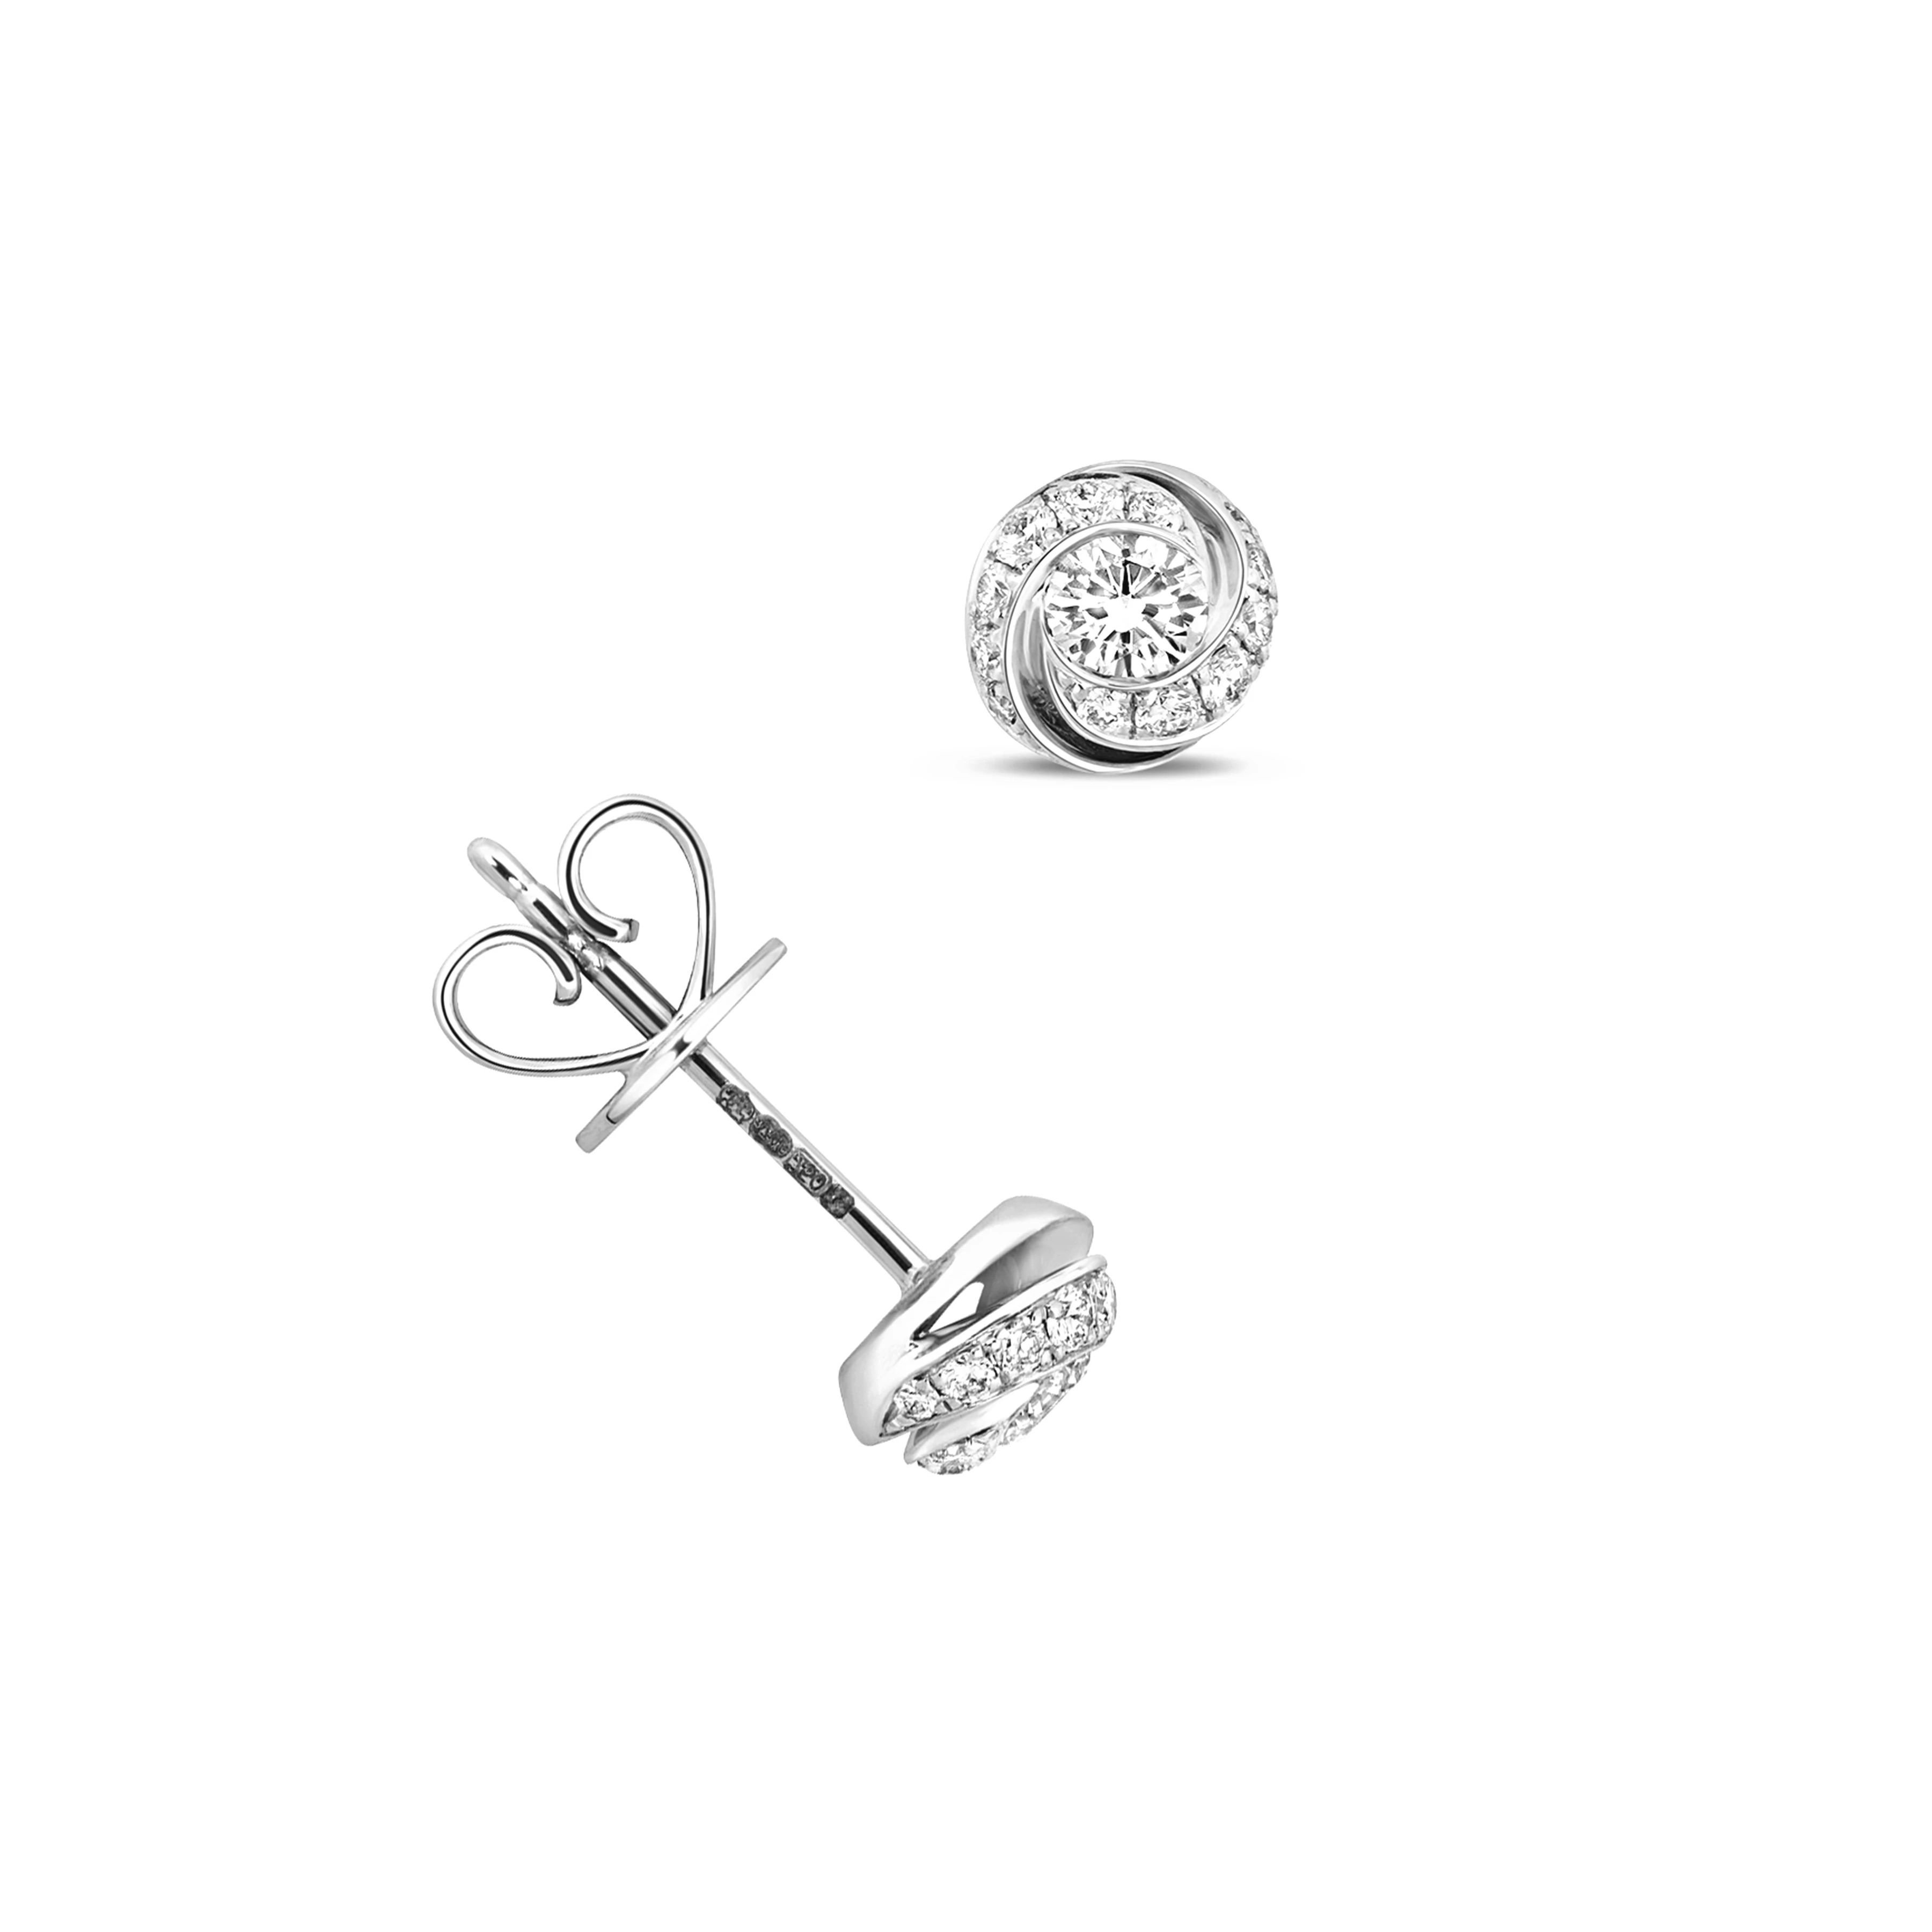 pave settings round shape cluster diamond earring